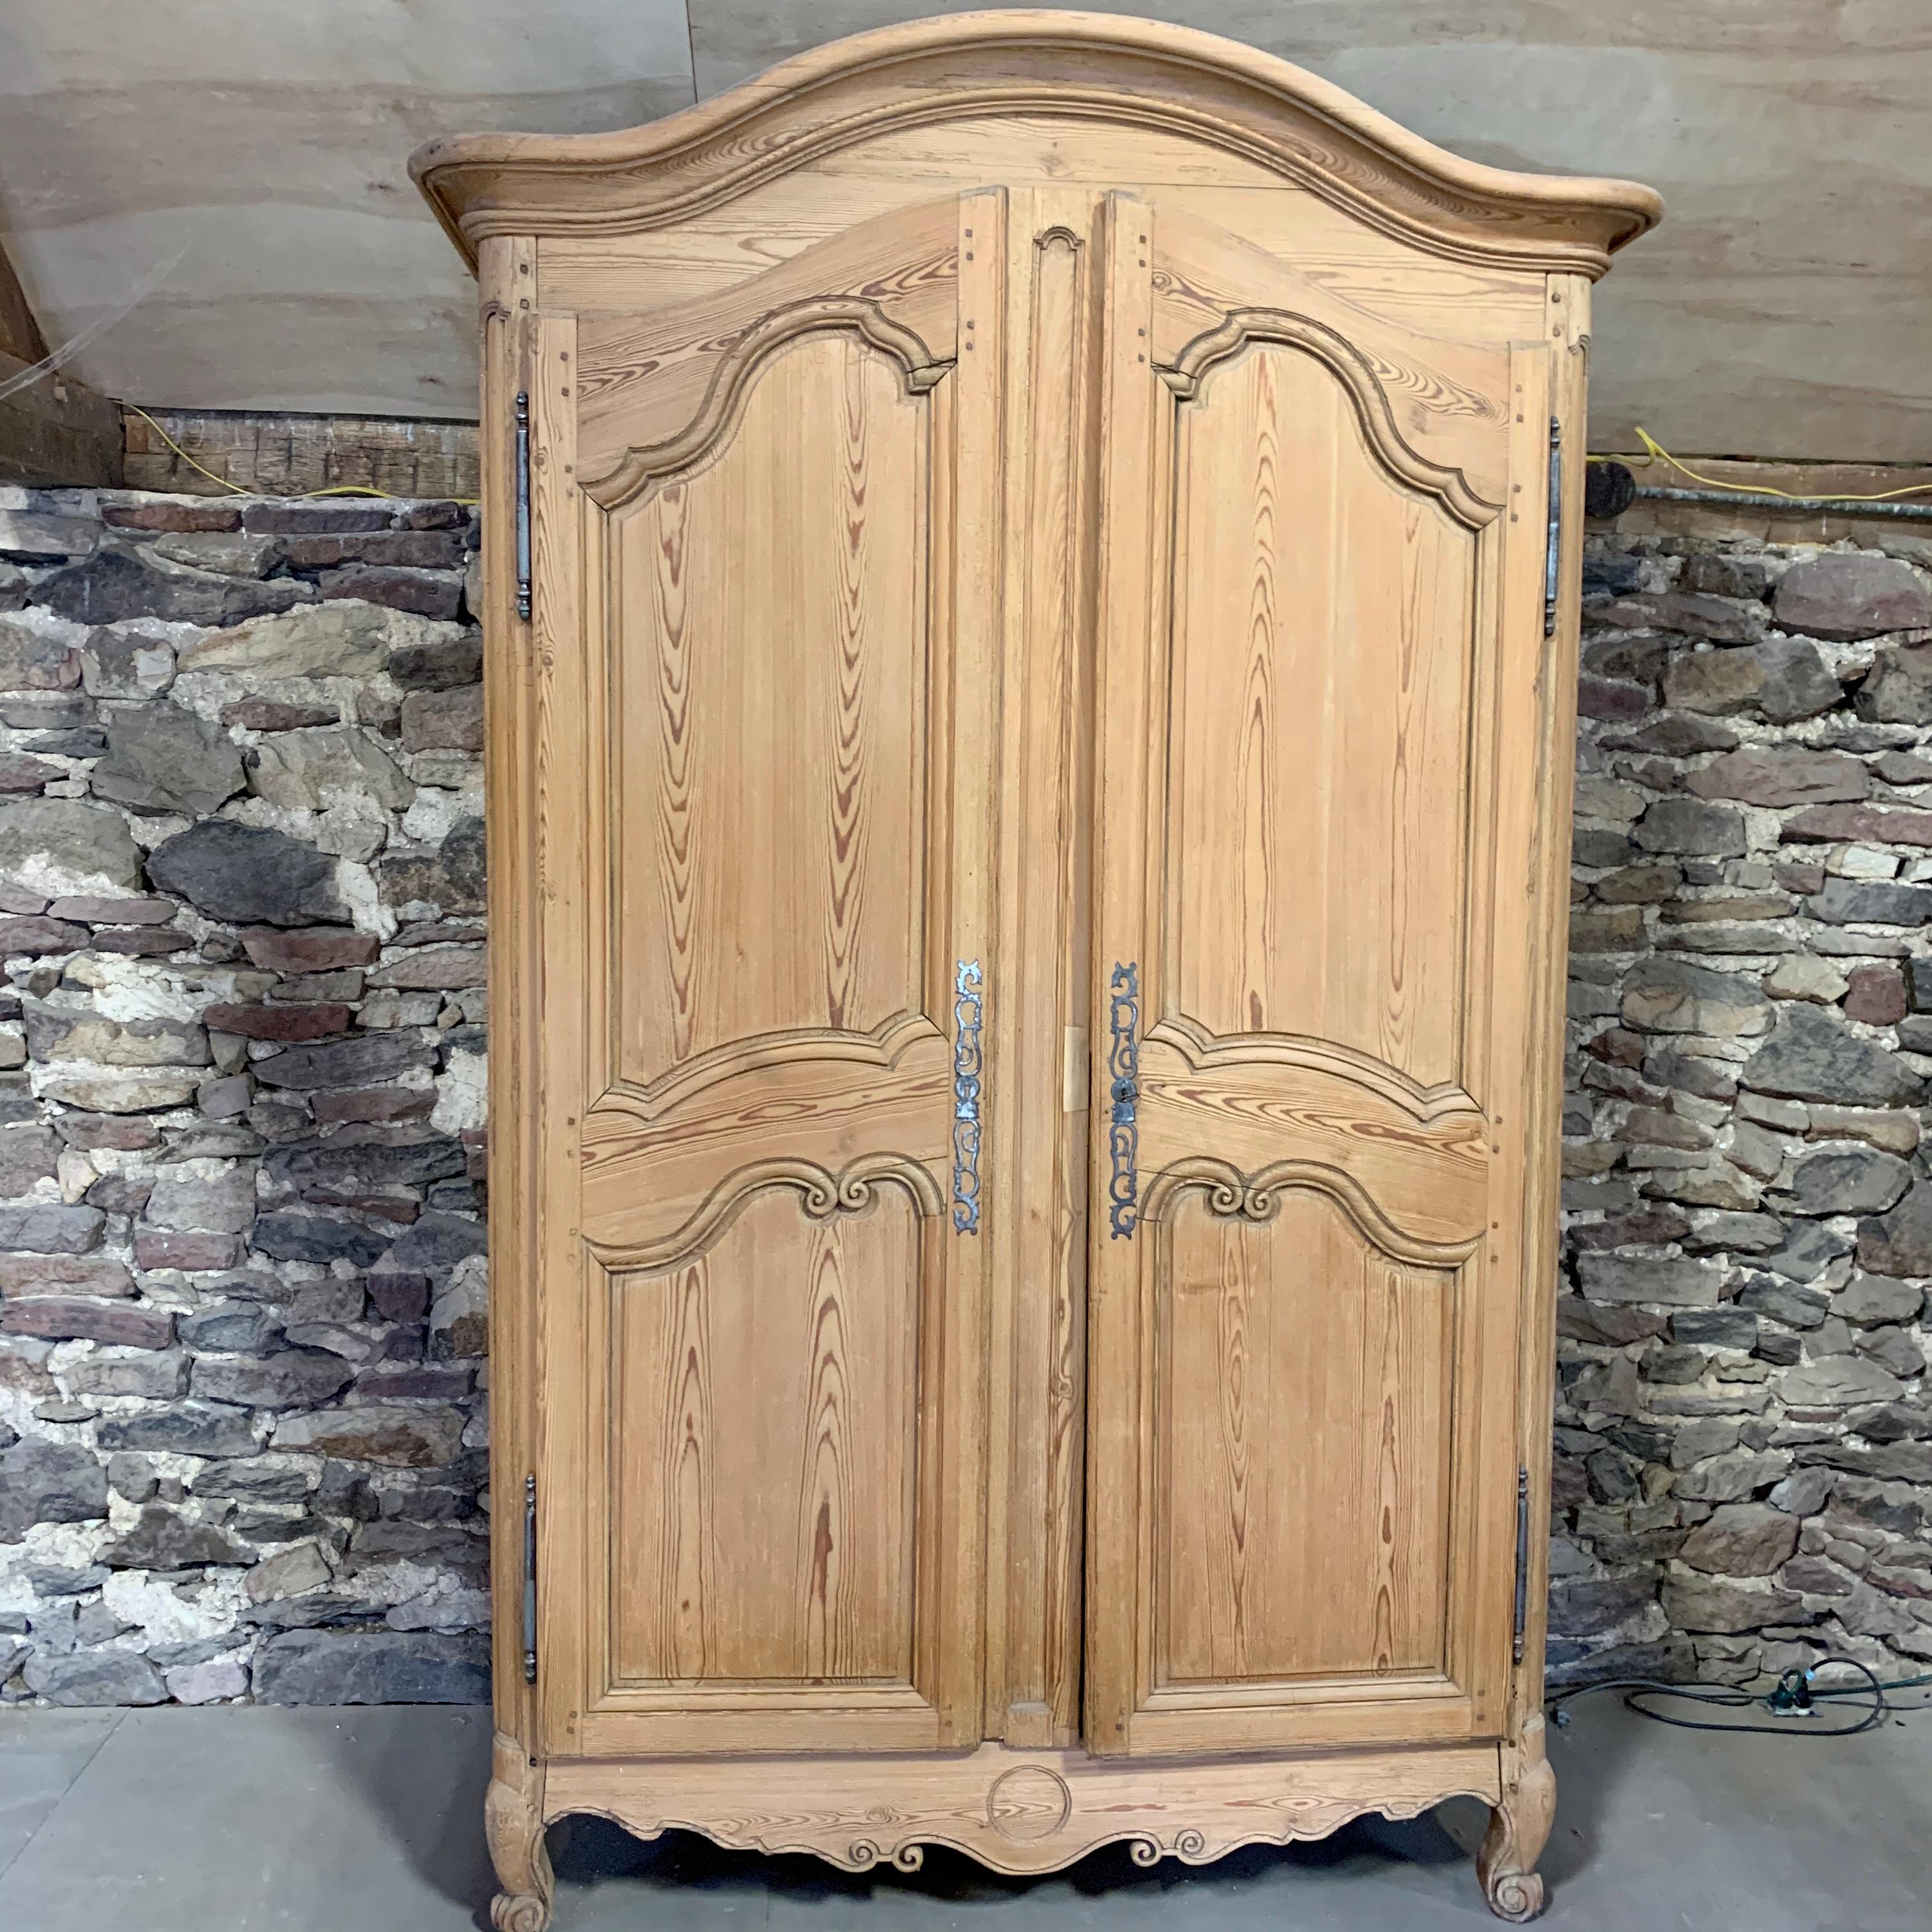 A large stripped pine Armoire, French Louis XV Period circa 1770, with an arched bonnet top, two large paneled doors on short cabriole legs. The interior has shelves (newer). Disassembles easily for transport.